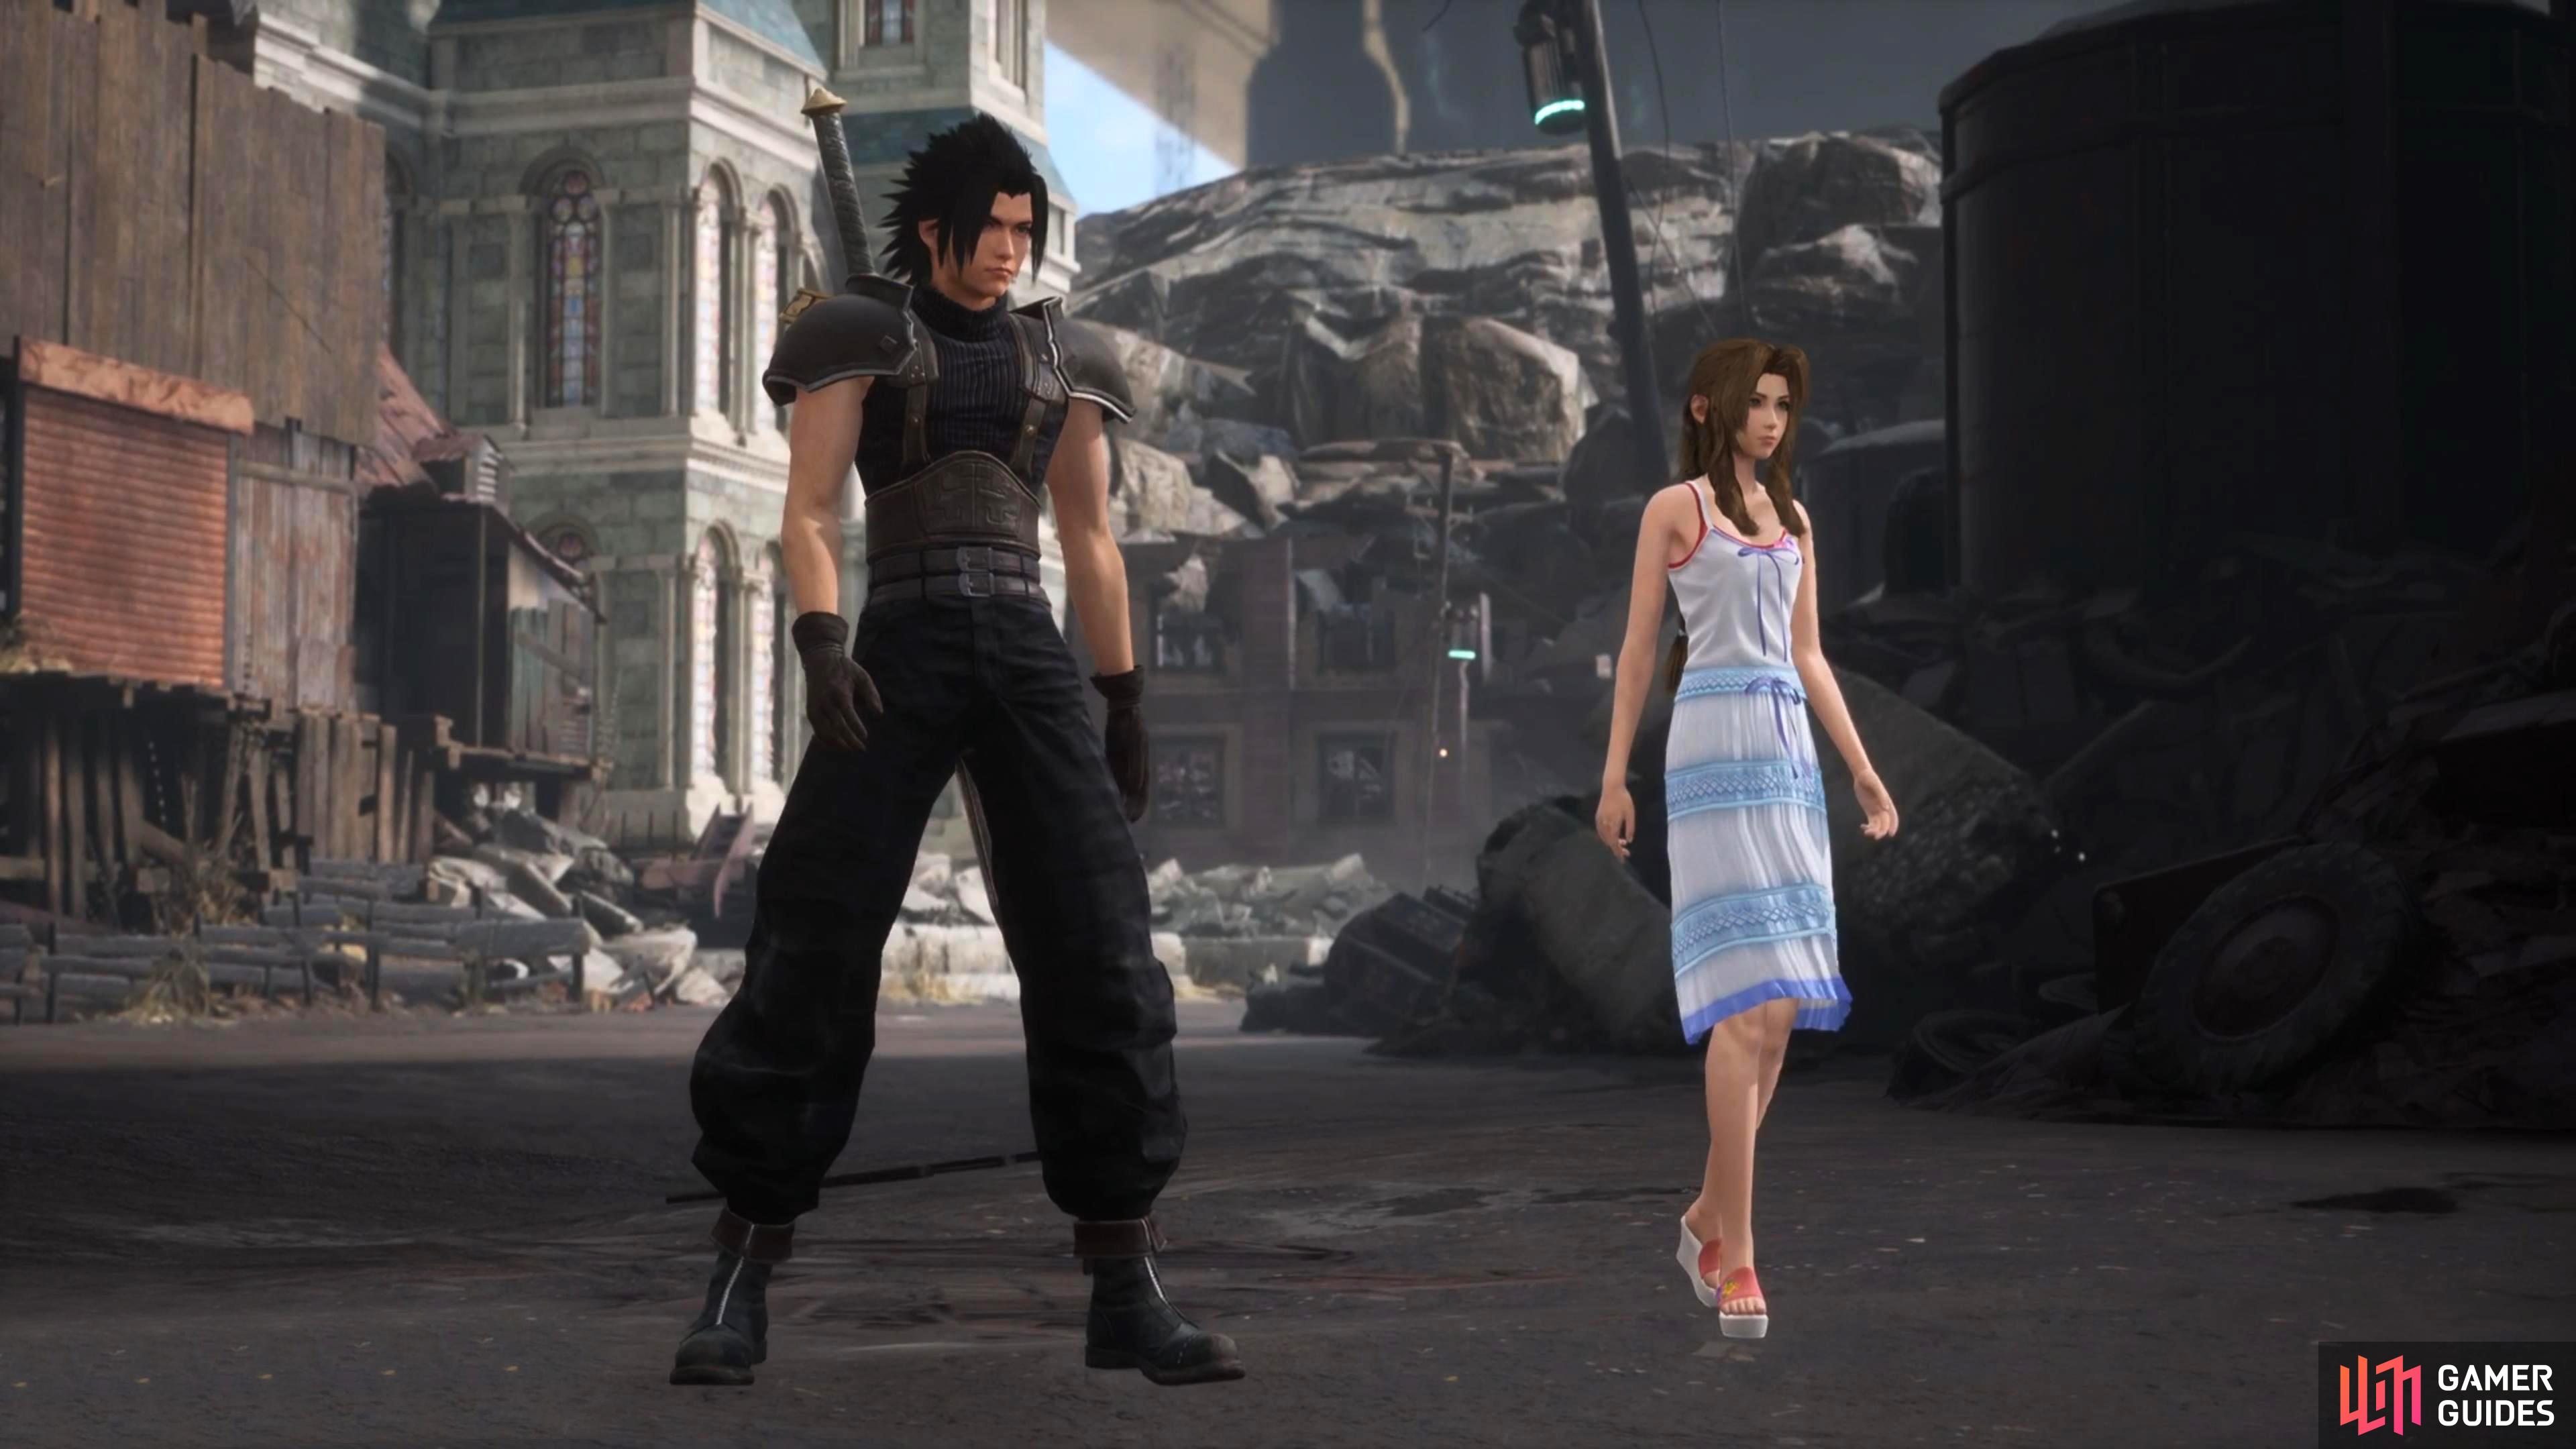 Zack taking a walk with Aerith in the Sector 5 Slums.